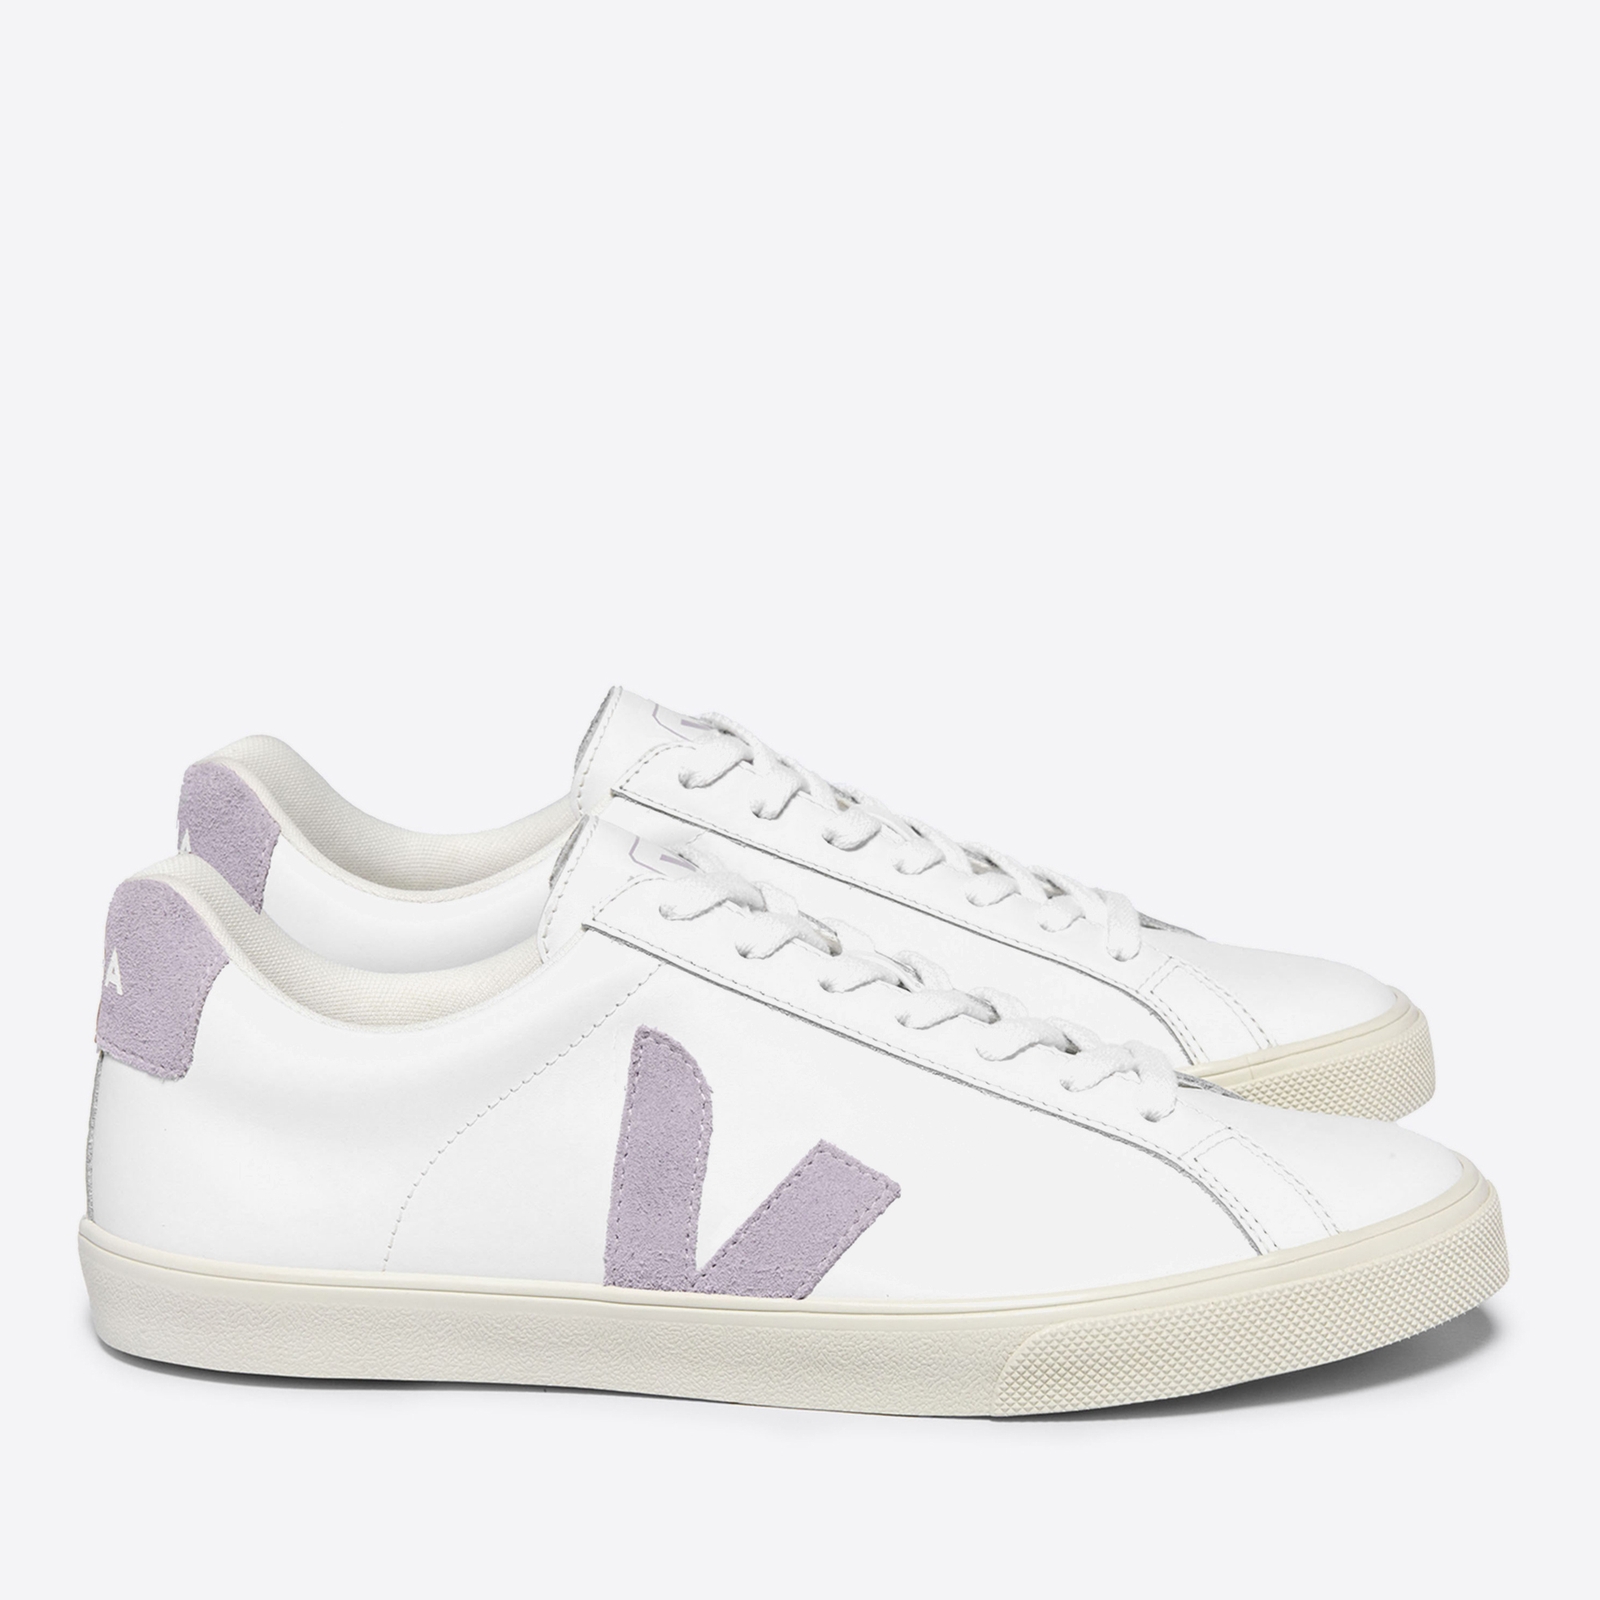 Veja Women's Esplar Logo-Appliqued Leather and Suede Trainers